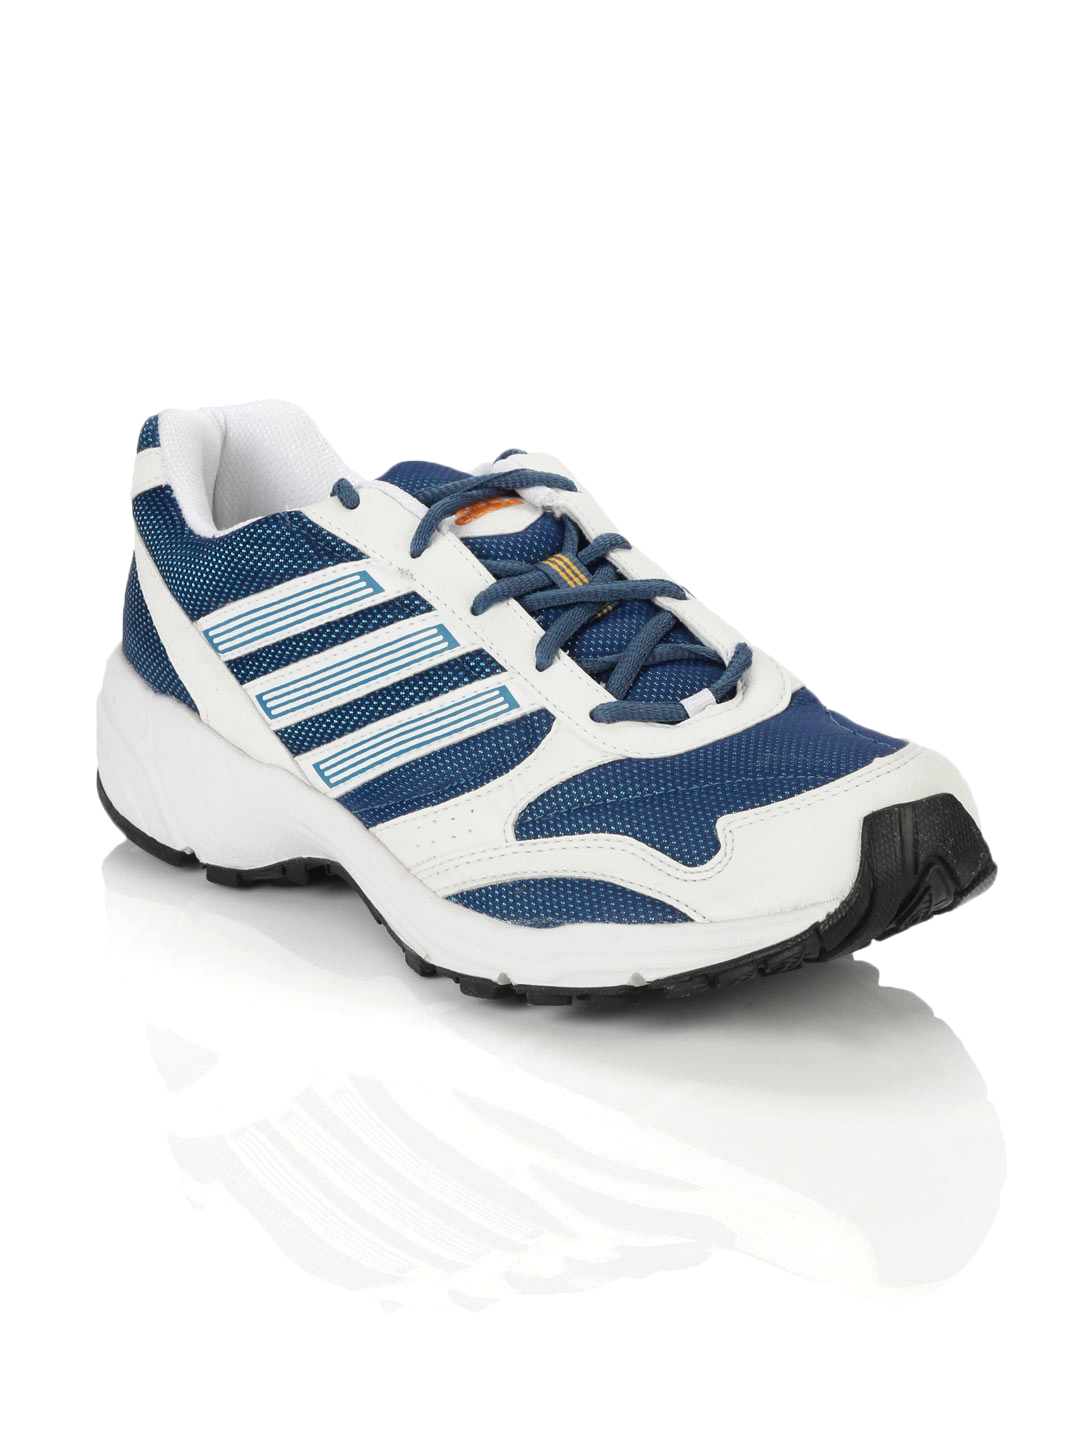 Download this More Sports Shoes From Adidas All Products picture